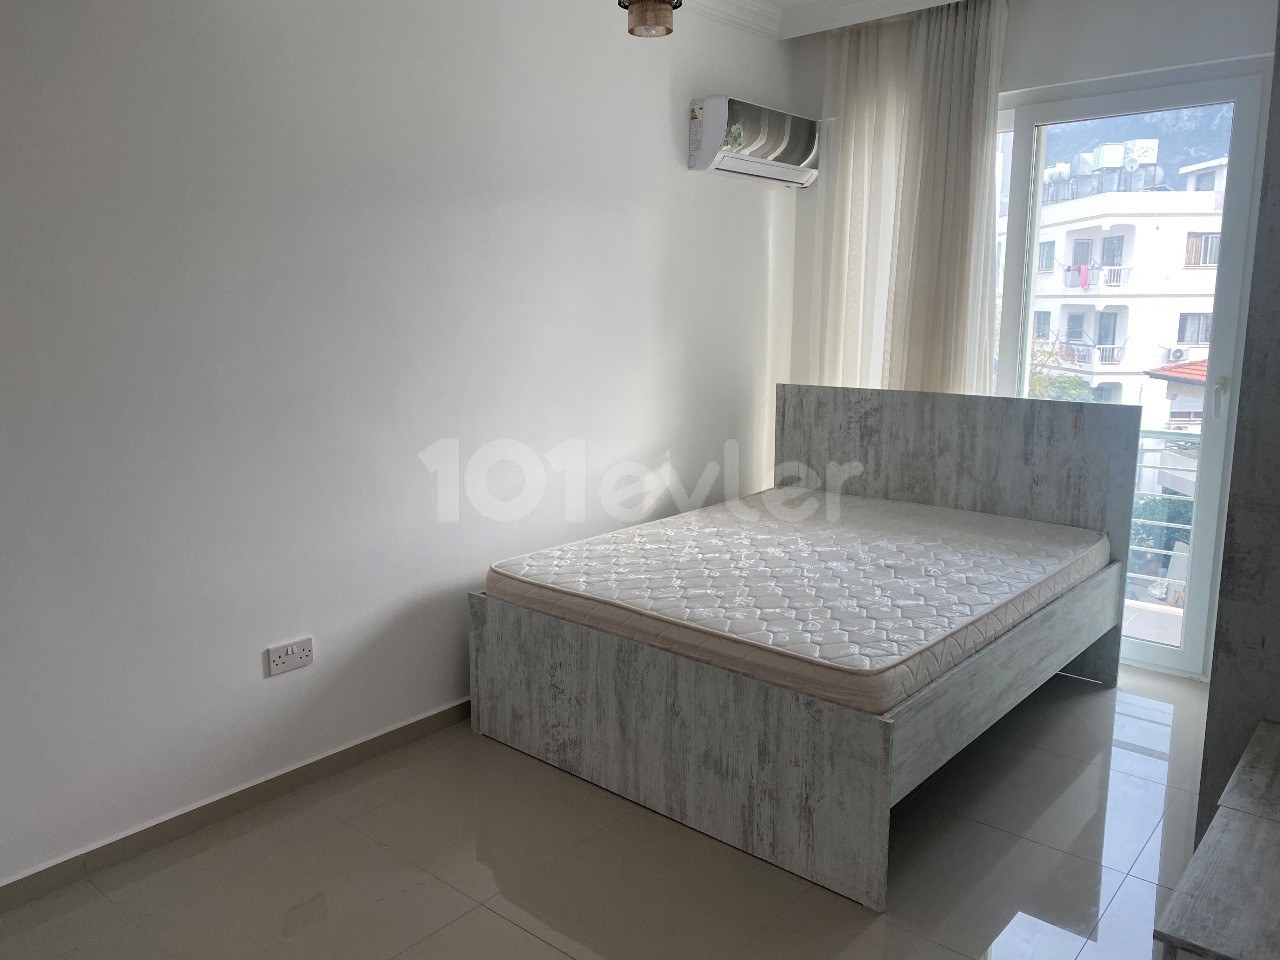 3+1 flat next to PIA BELLA HOTEL IN KYRENIA CENTER, not worth this price